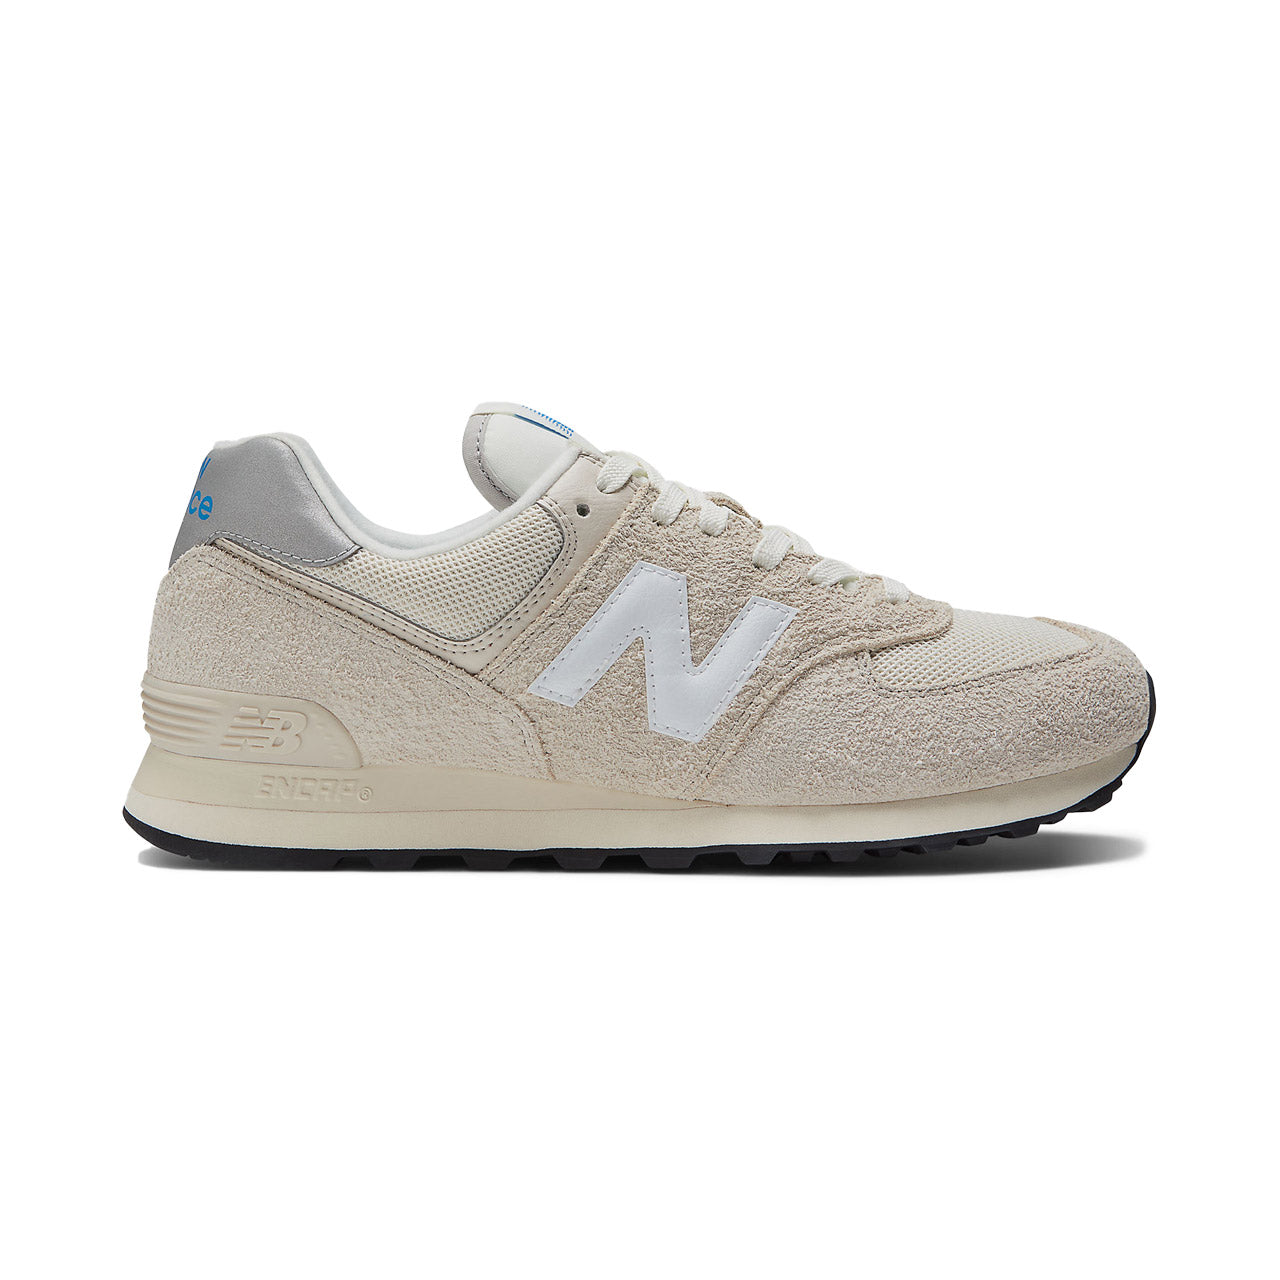 New Balance 574 Reflection Grey Sneakers